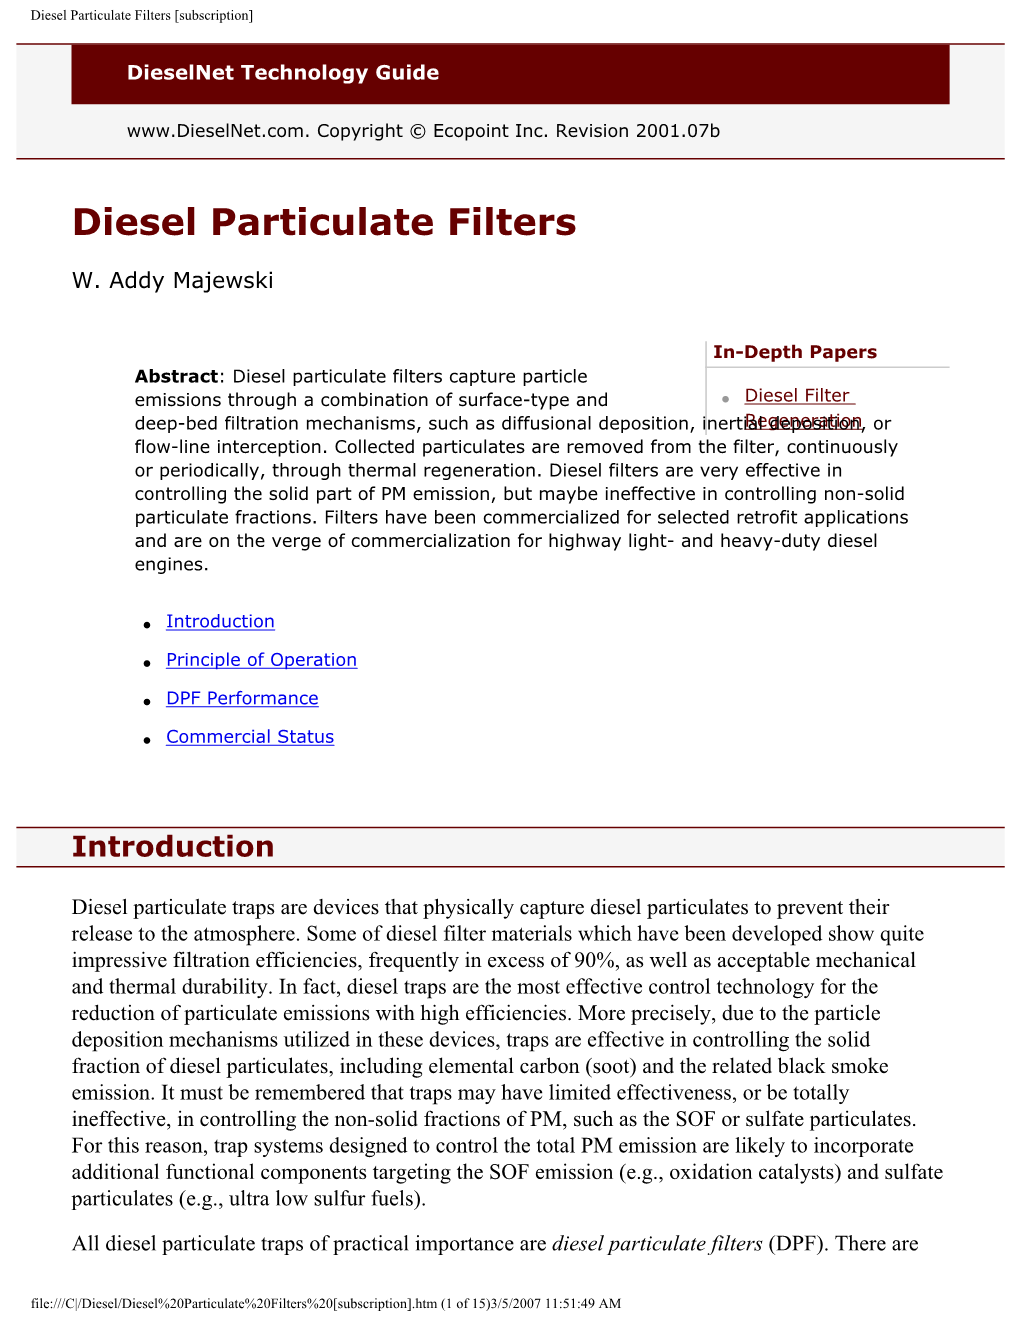 Diesel Particulate Filters [Subscription]